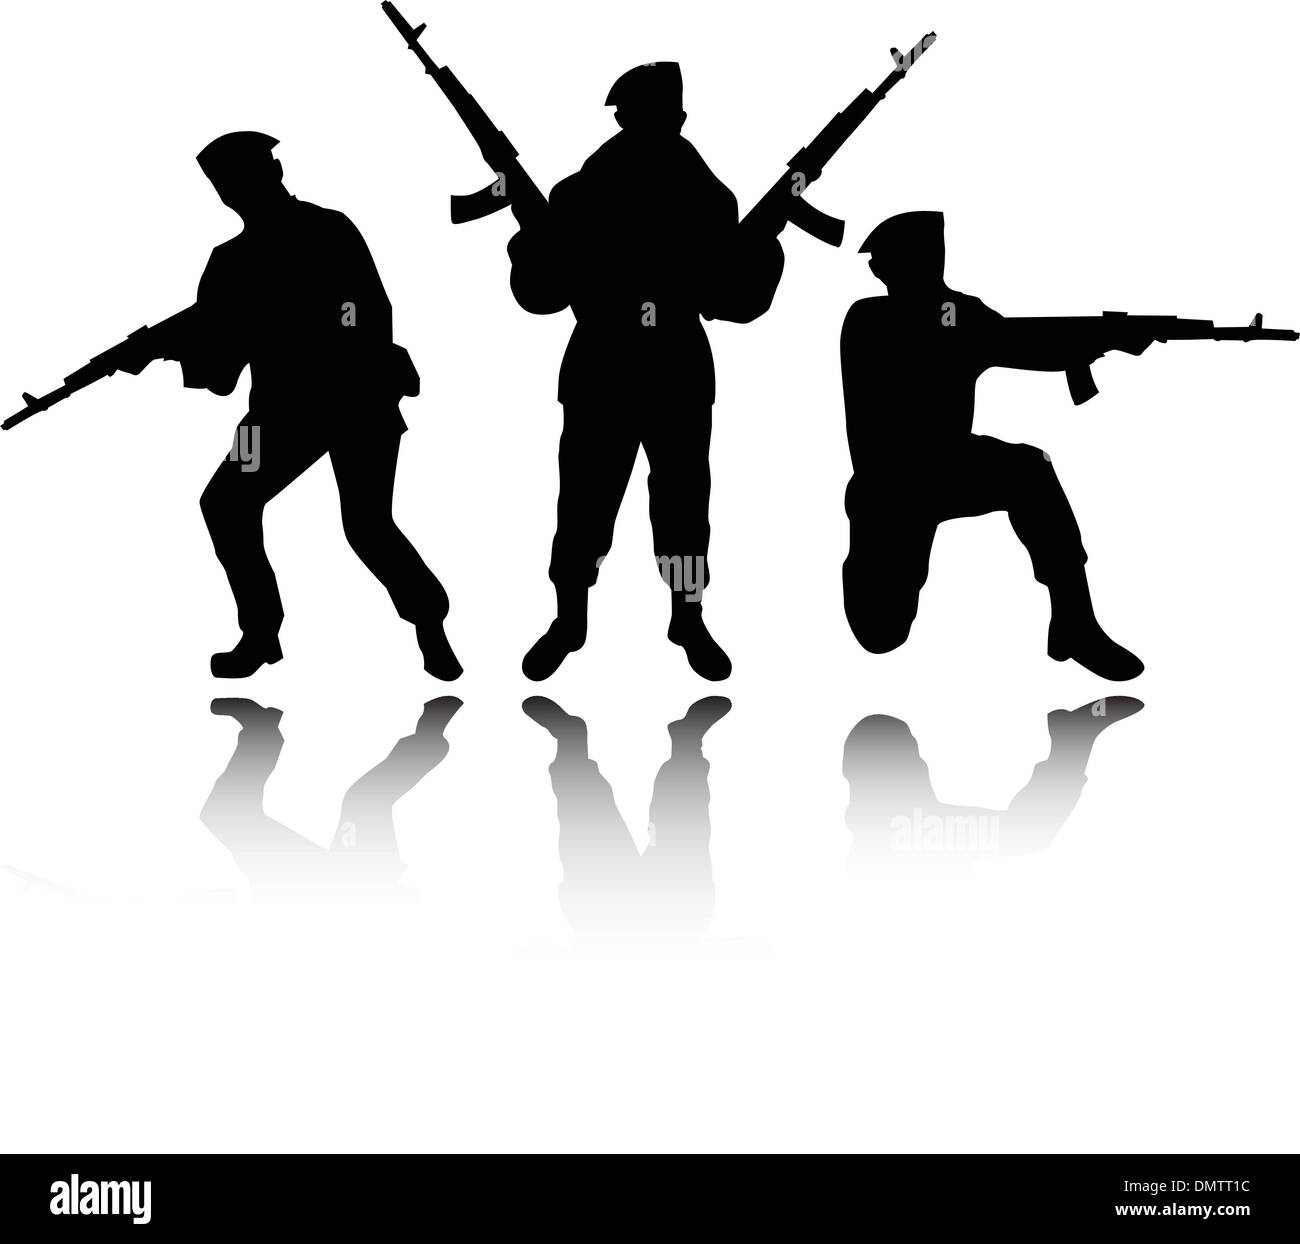 the vector soldiers silhouettes Stock Vector